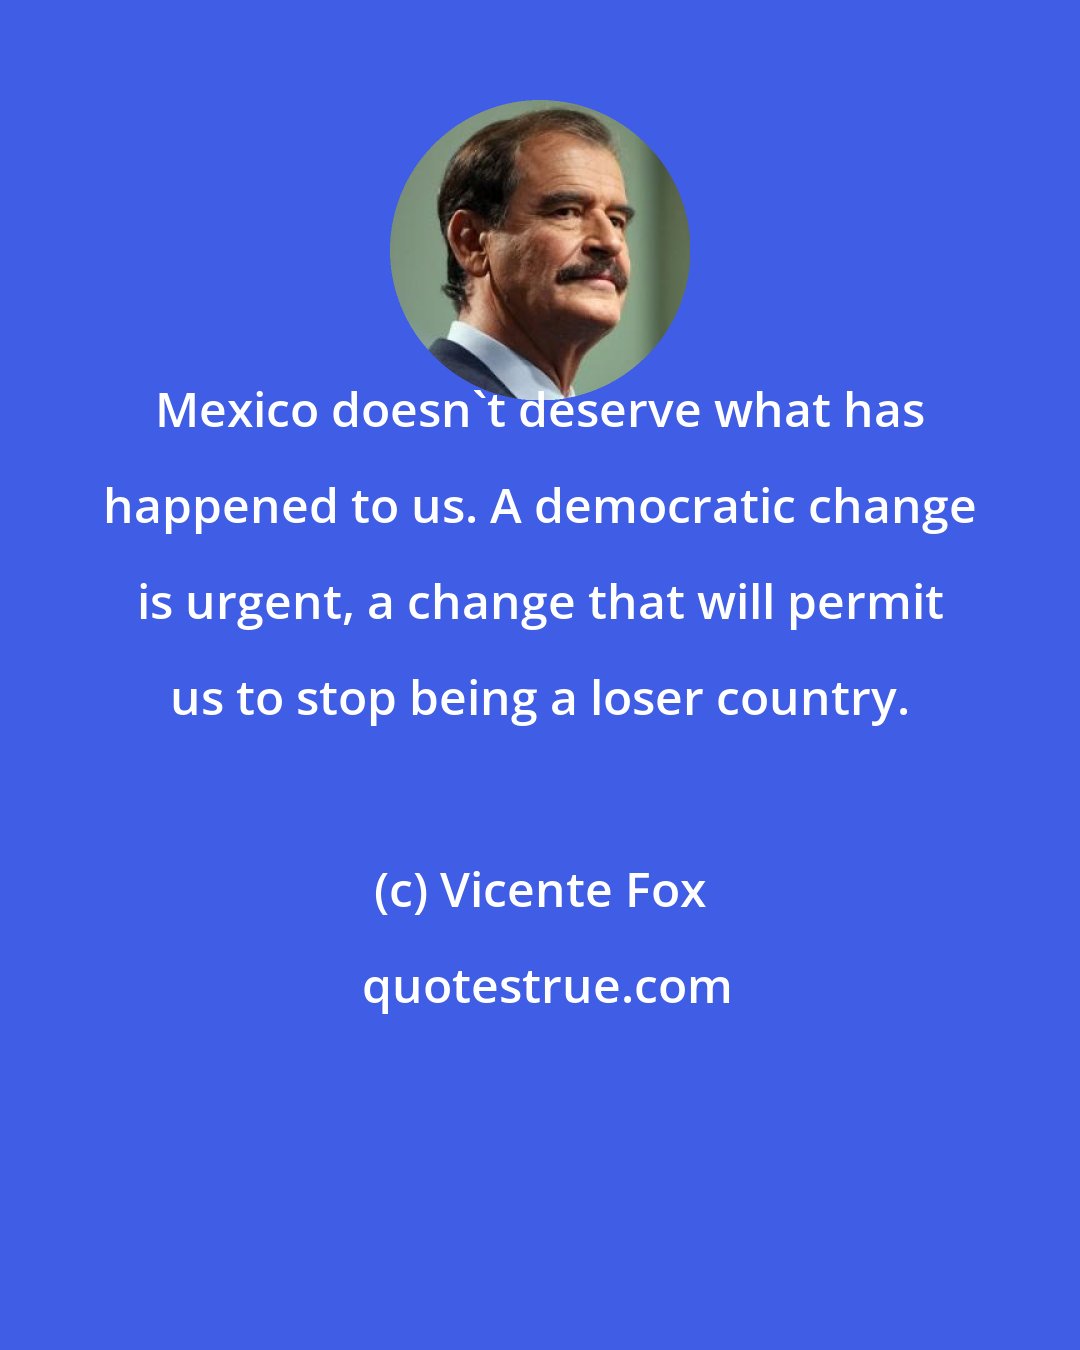 Vicente Fox: Mexico doesn't deserve what has happened to us. A democratic change is urgent, a change that will permit us to stop being a loser country.